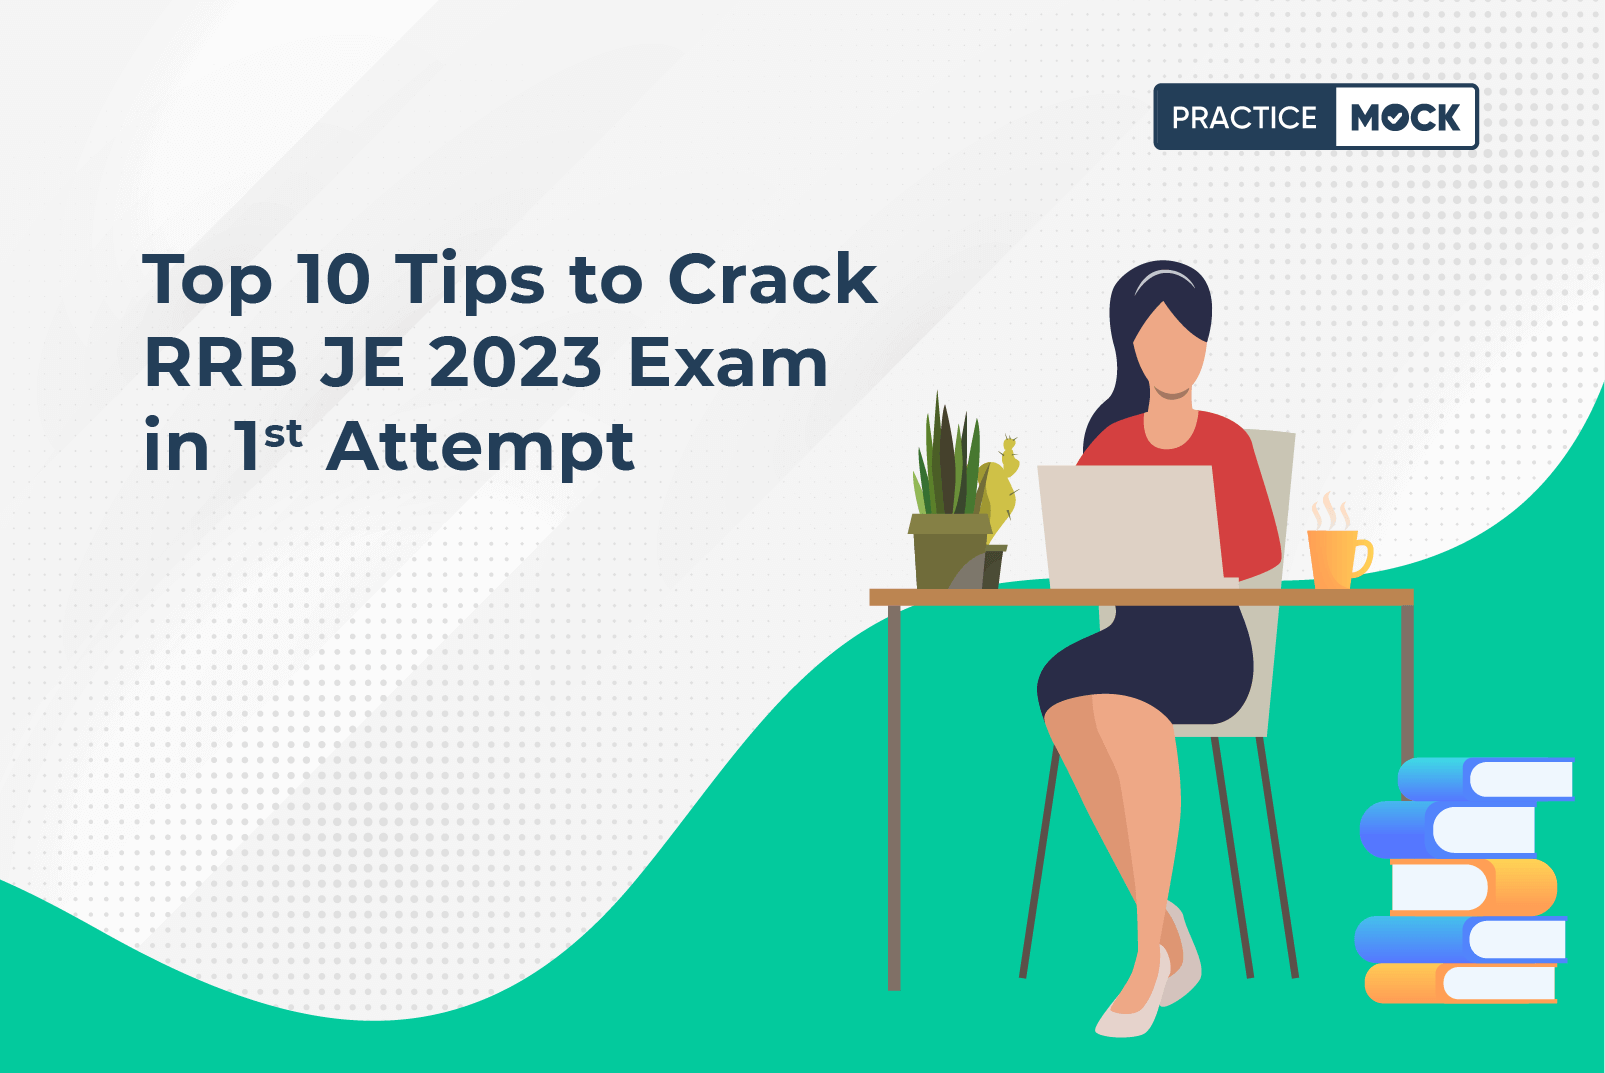 Top-10-Tips-to-Crack-RRB-JE-2023-Exam-in-1st-Attempt